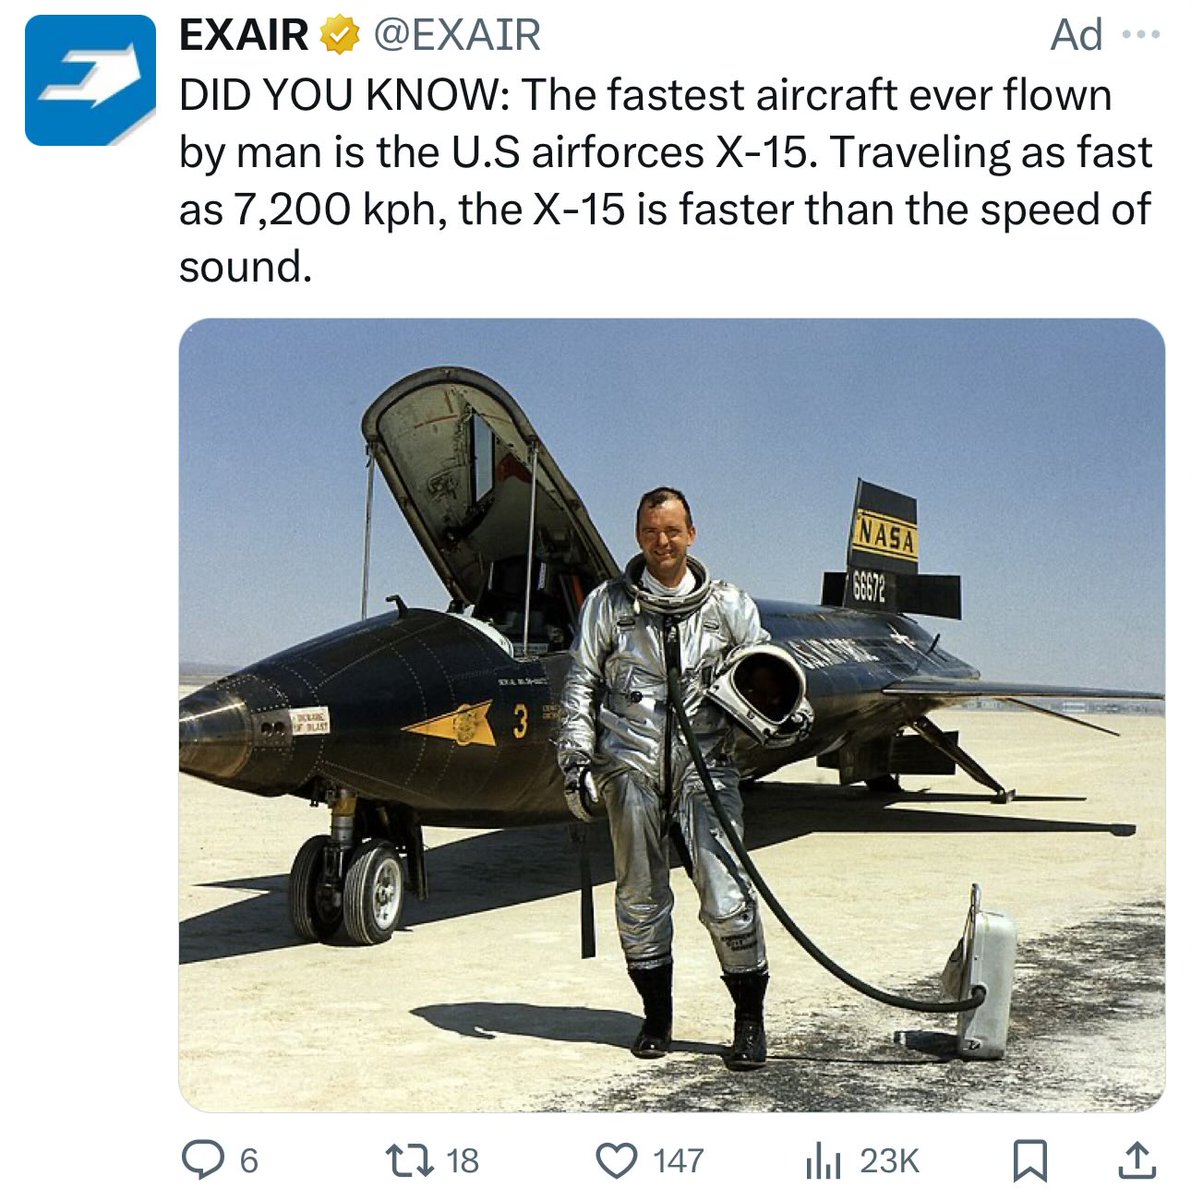 Lol 'faster than the speed of sound' is really under-selling Mach 6.7